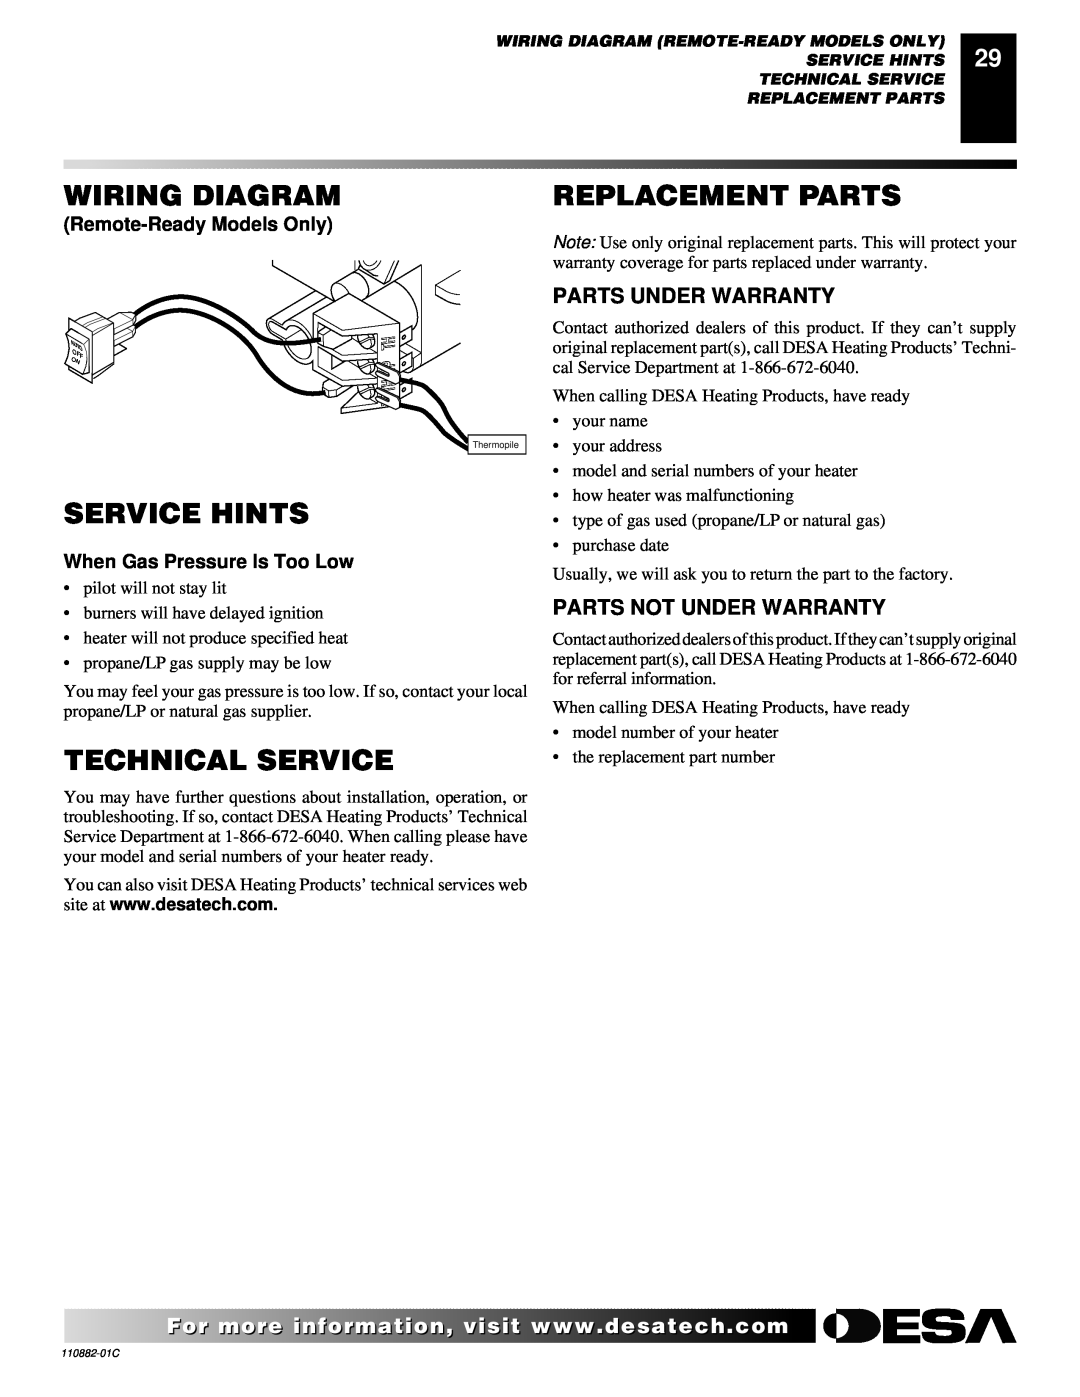 Desa R, V, T, 30 Wiring Diagram, Replacement Parts, Service Hints, Technical Service, Remote-ReadyModels Only 